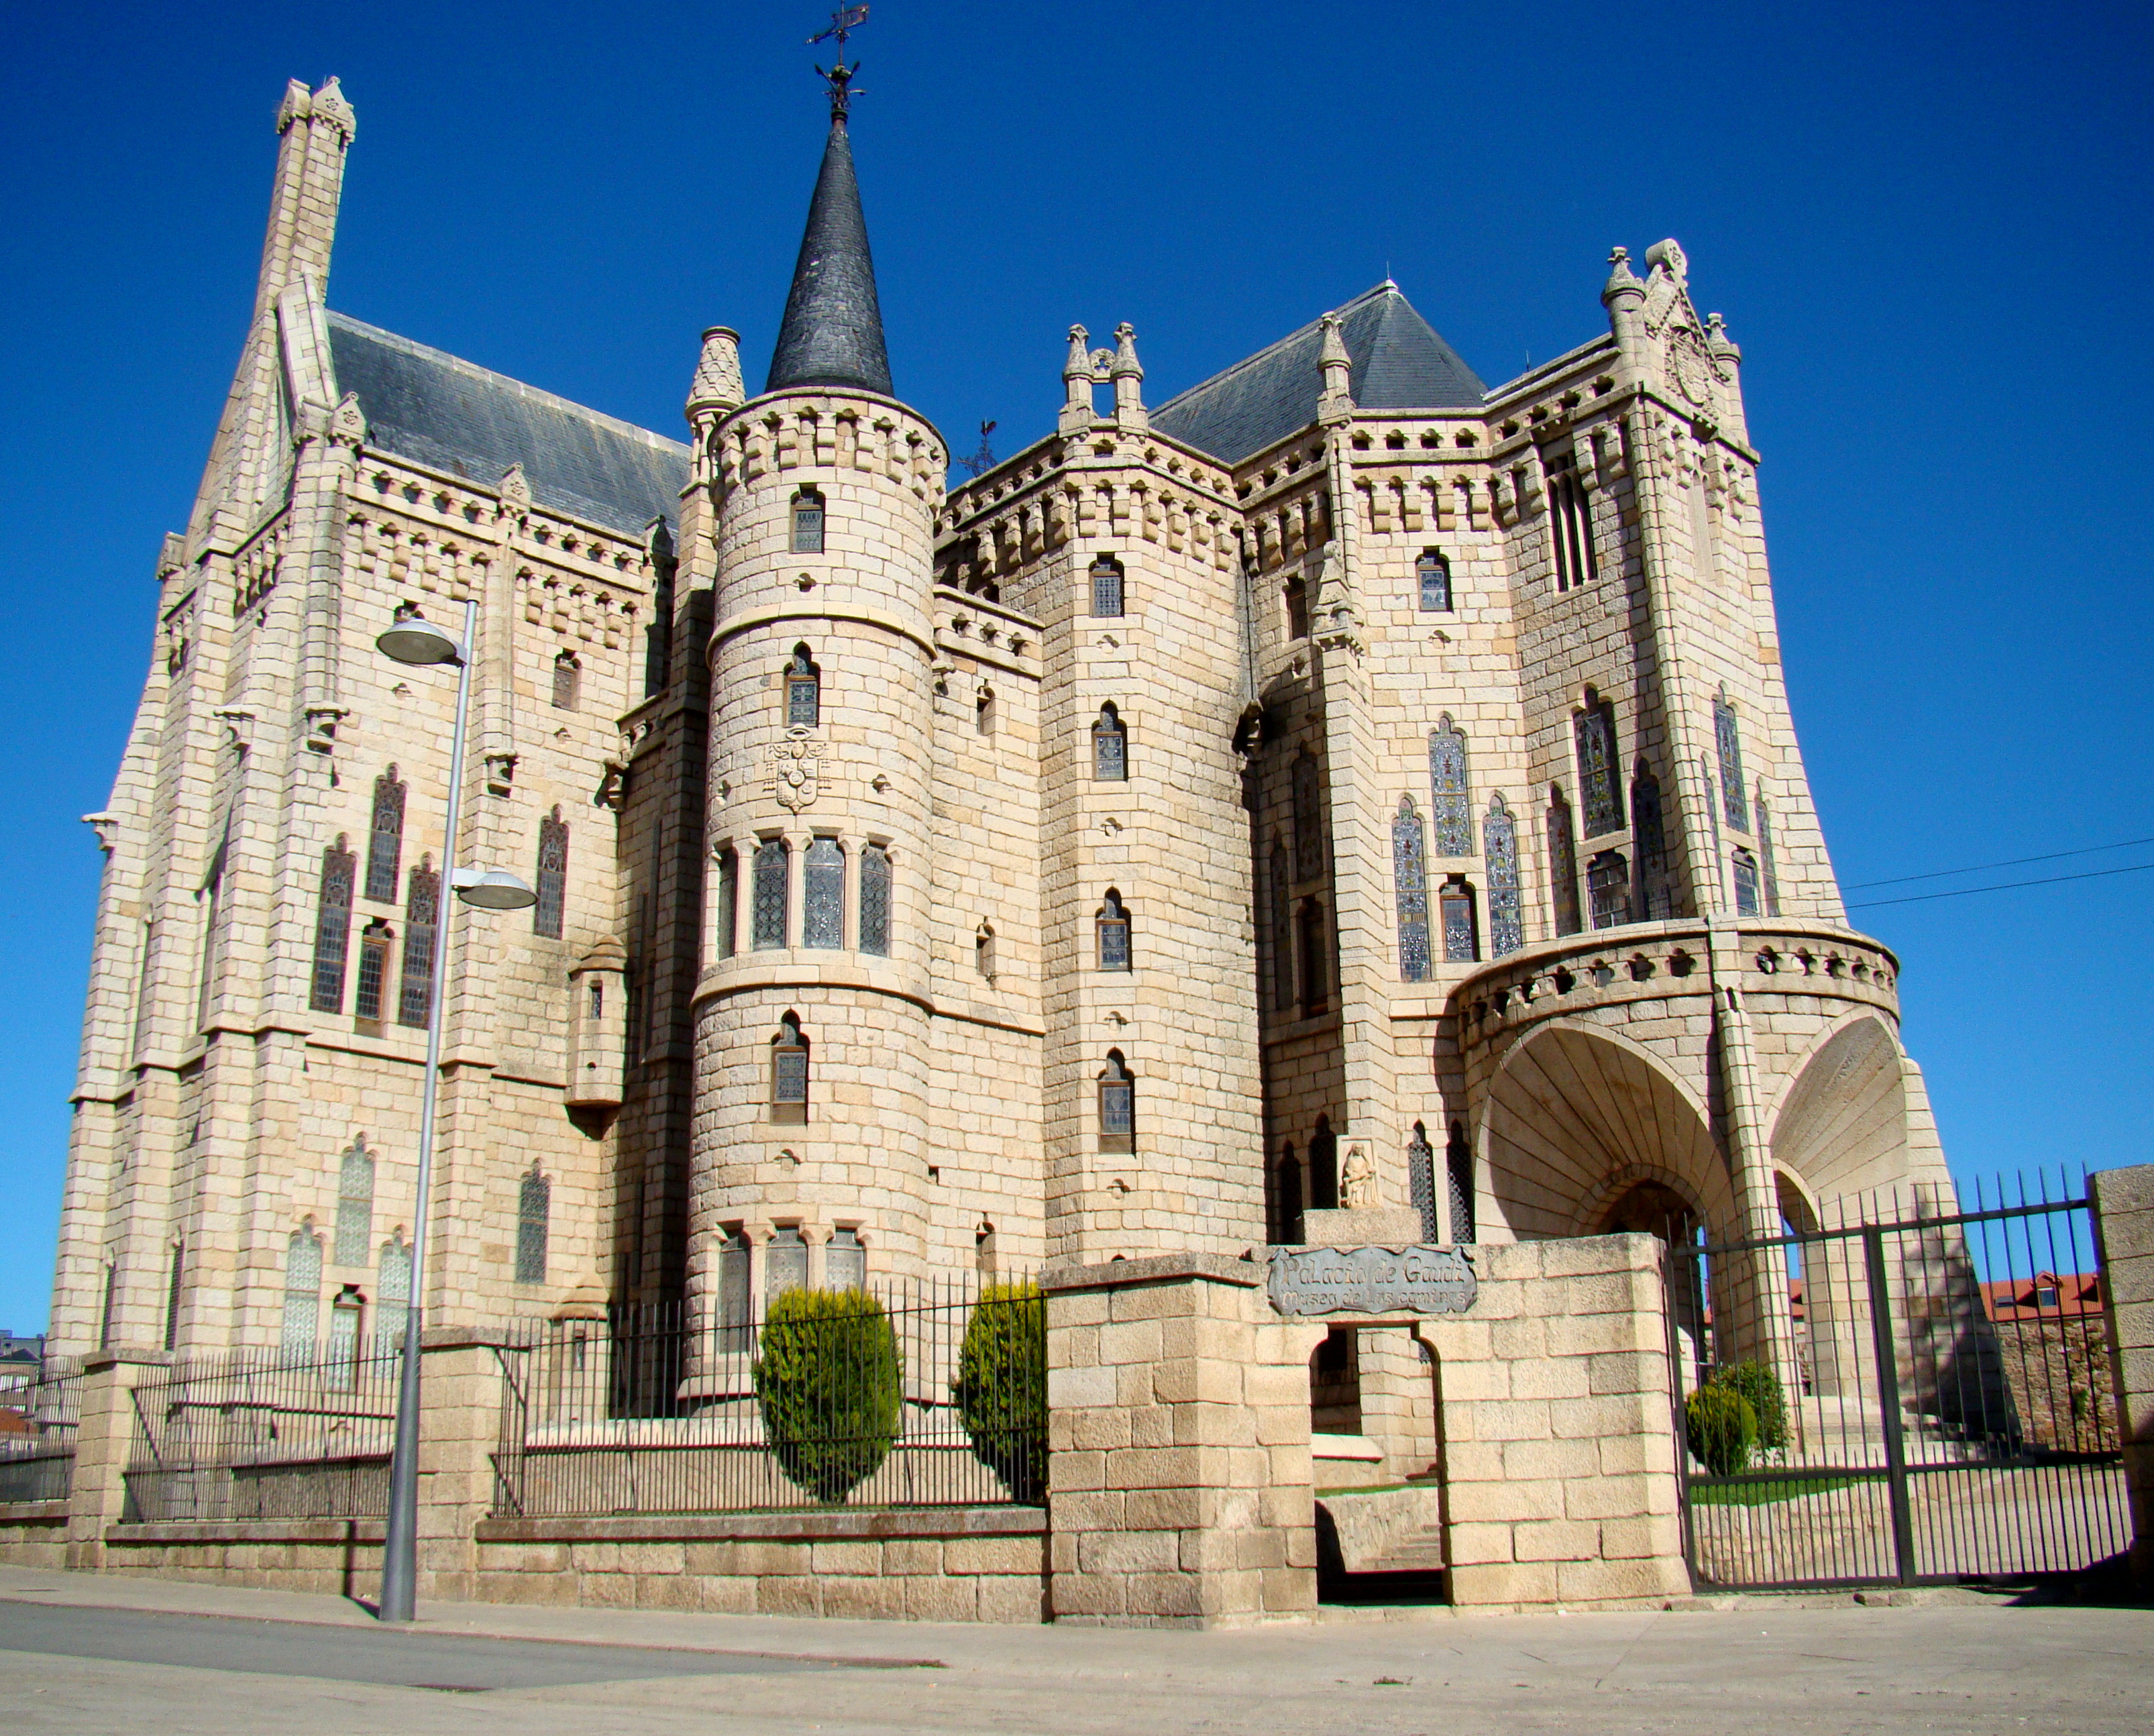 <p>built between 1889 and 1913. Designed in the Catalan Modernisme style, it is one of only three buildings by Gaudí outside Catalonia. When the original Episcopal Palace was destroyed by a fire in the 19th century, Bishop Juan Bautista Grau y Vallespinos of the Roman Catholic Diocese of Astorga decided to assign the design of the new building to his friend Antoni Gaudí.</p>